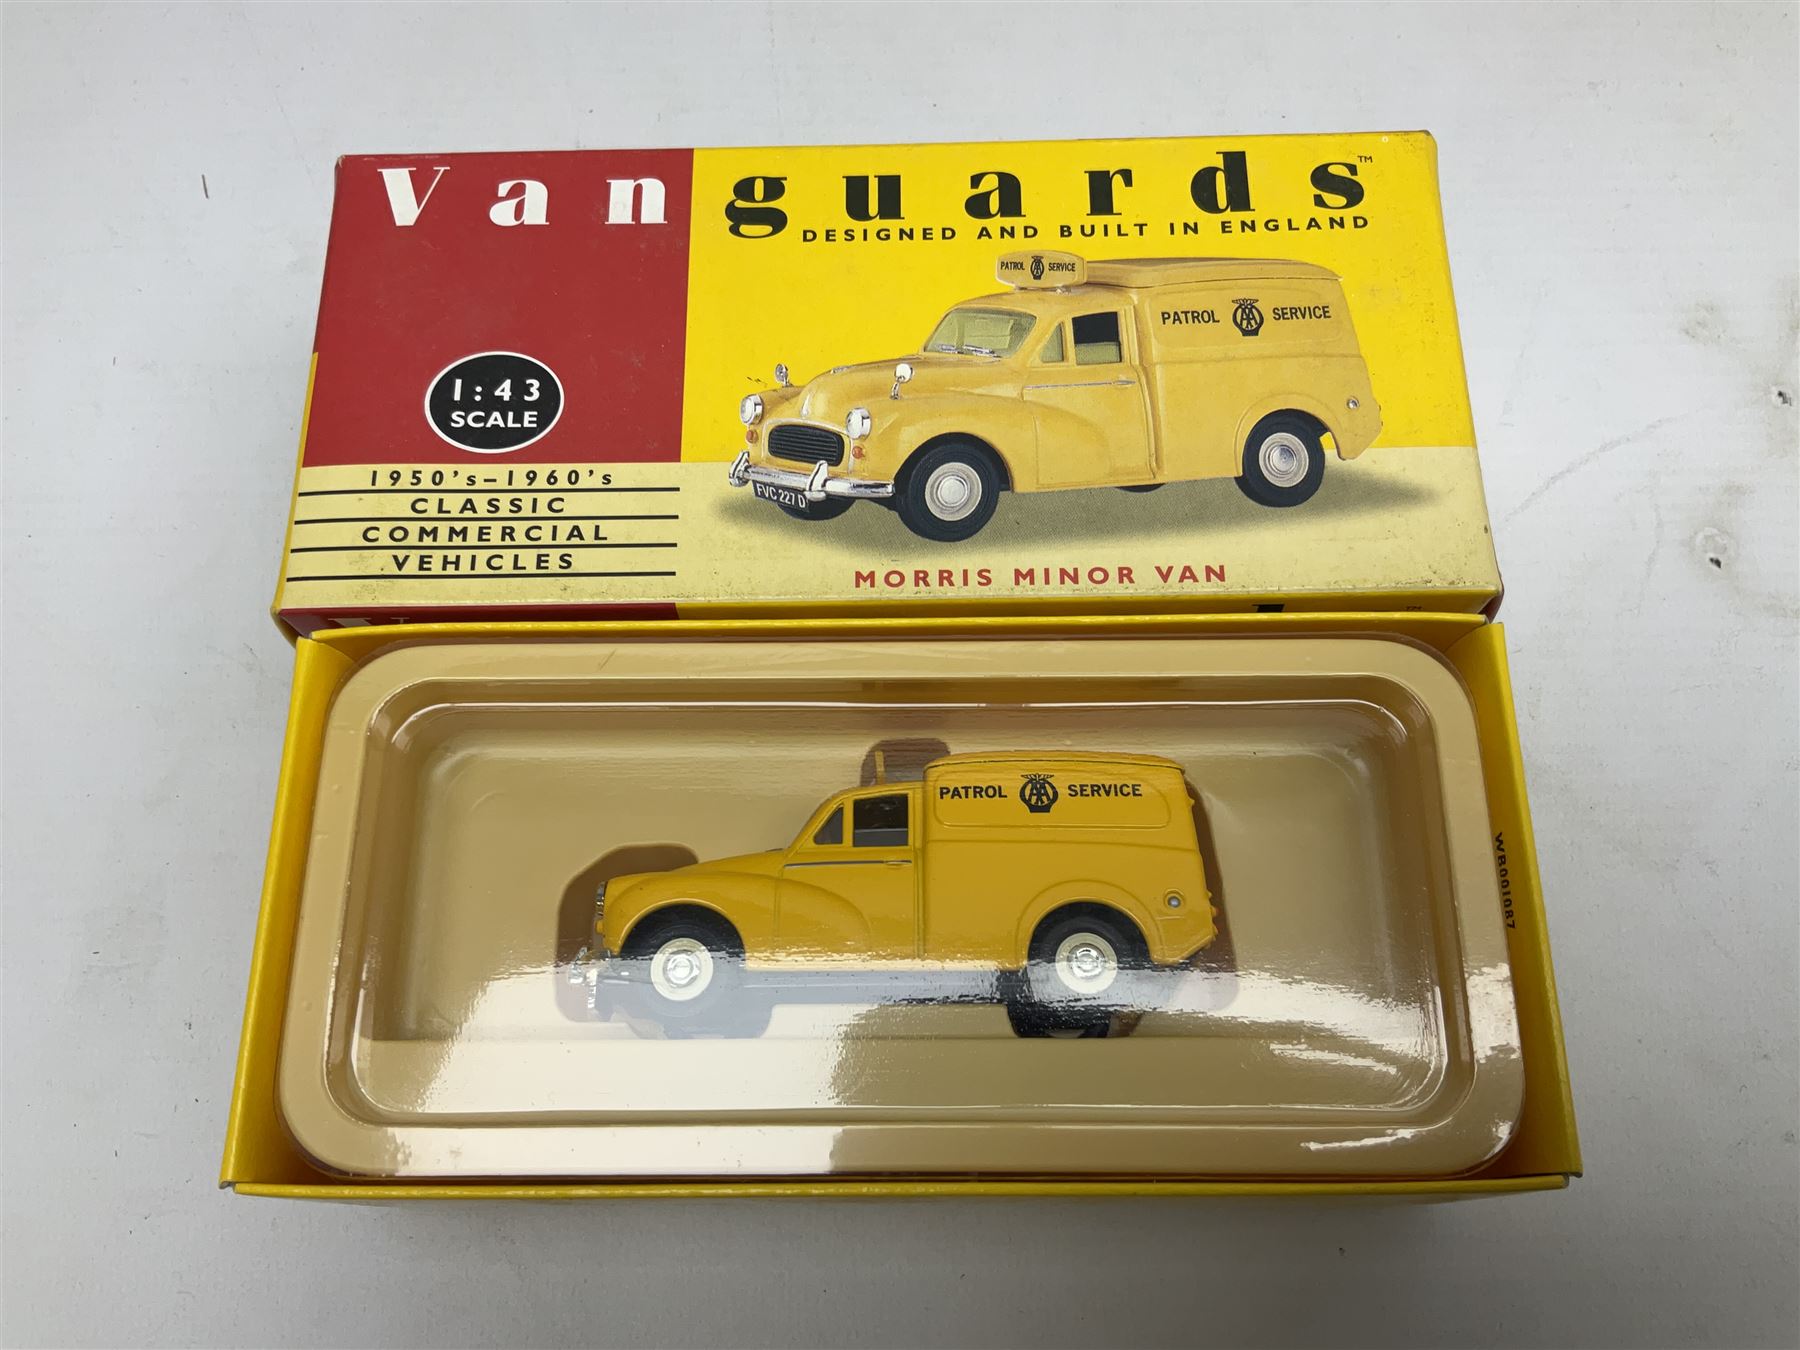 Sixteen Lledo Vanguards 1:43 scale 1950's-1960's Classic Commercial Vehicles die-cast models - Image 5 of 8